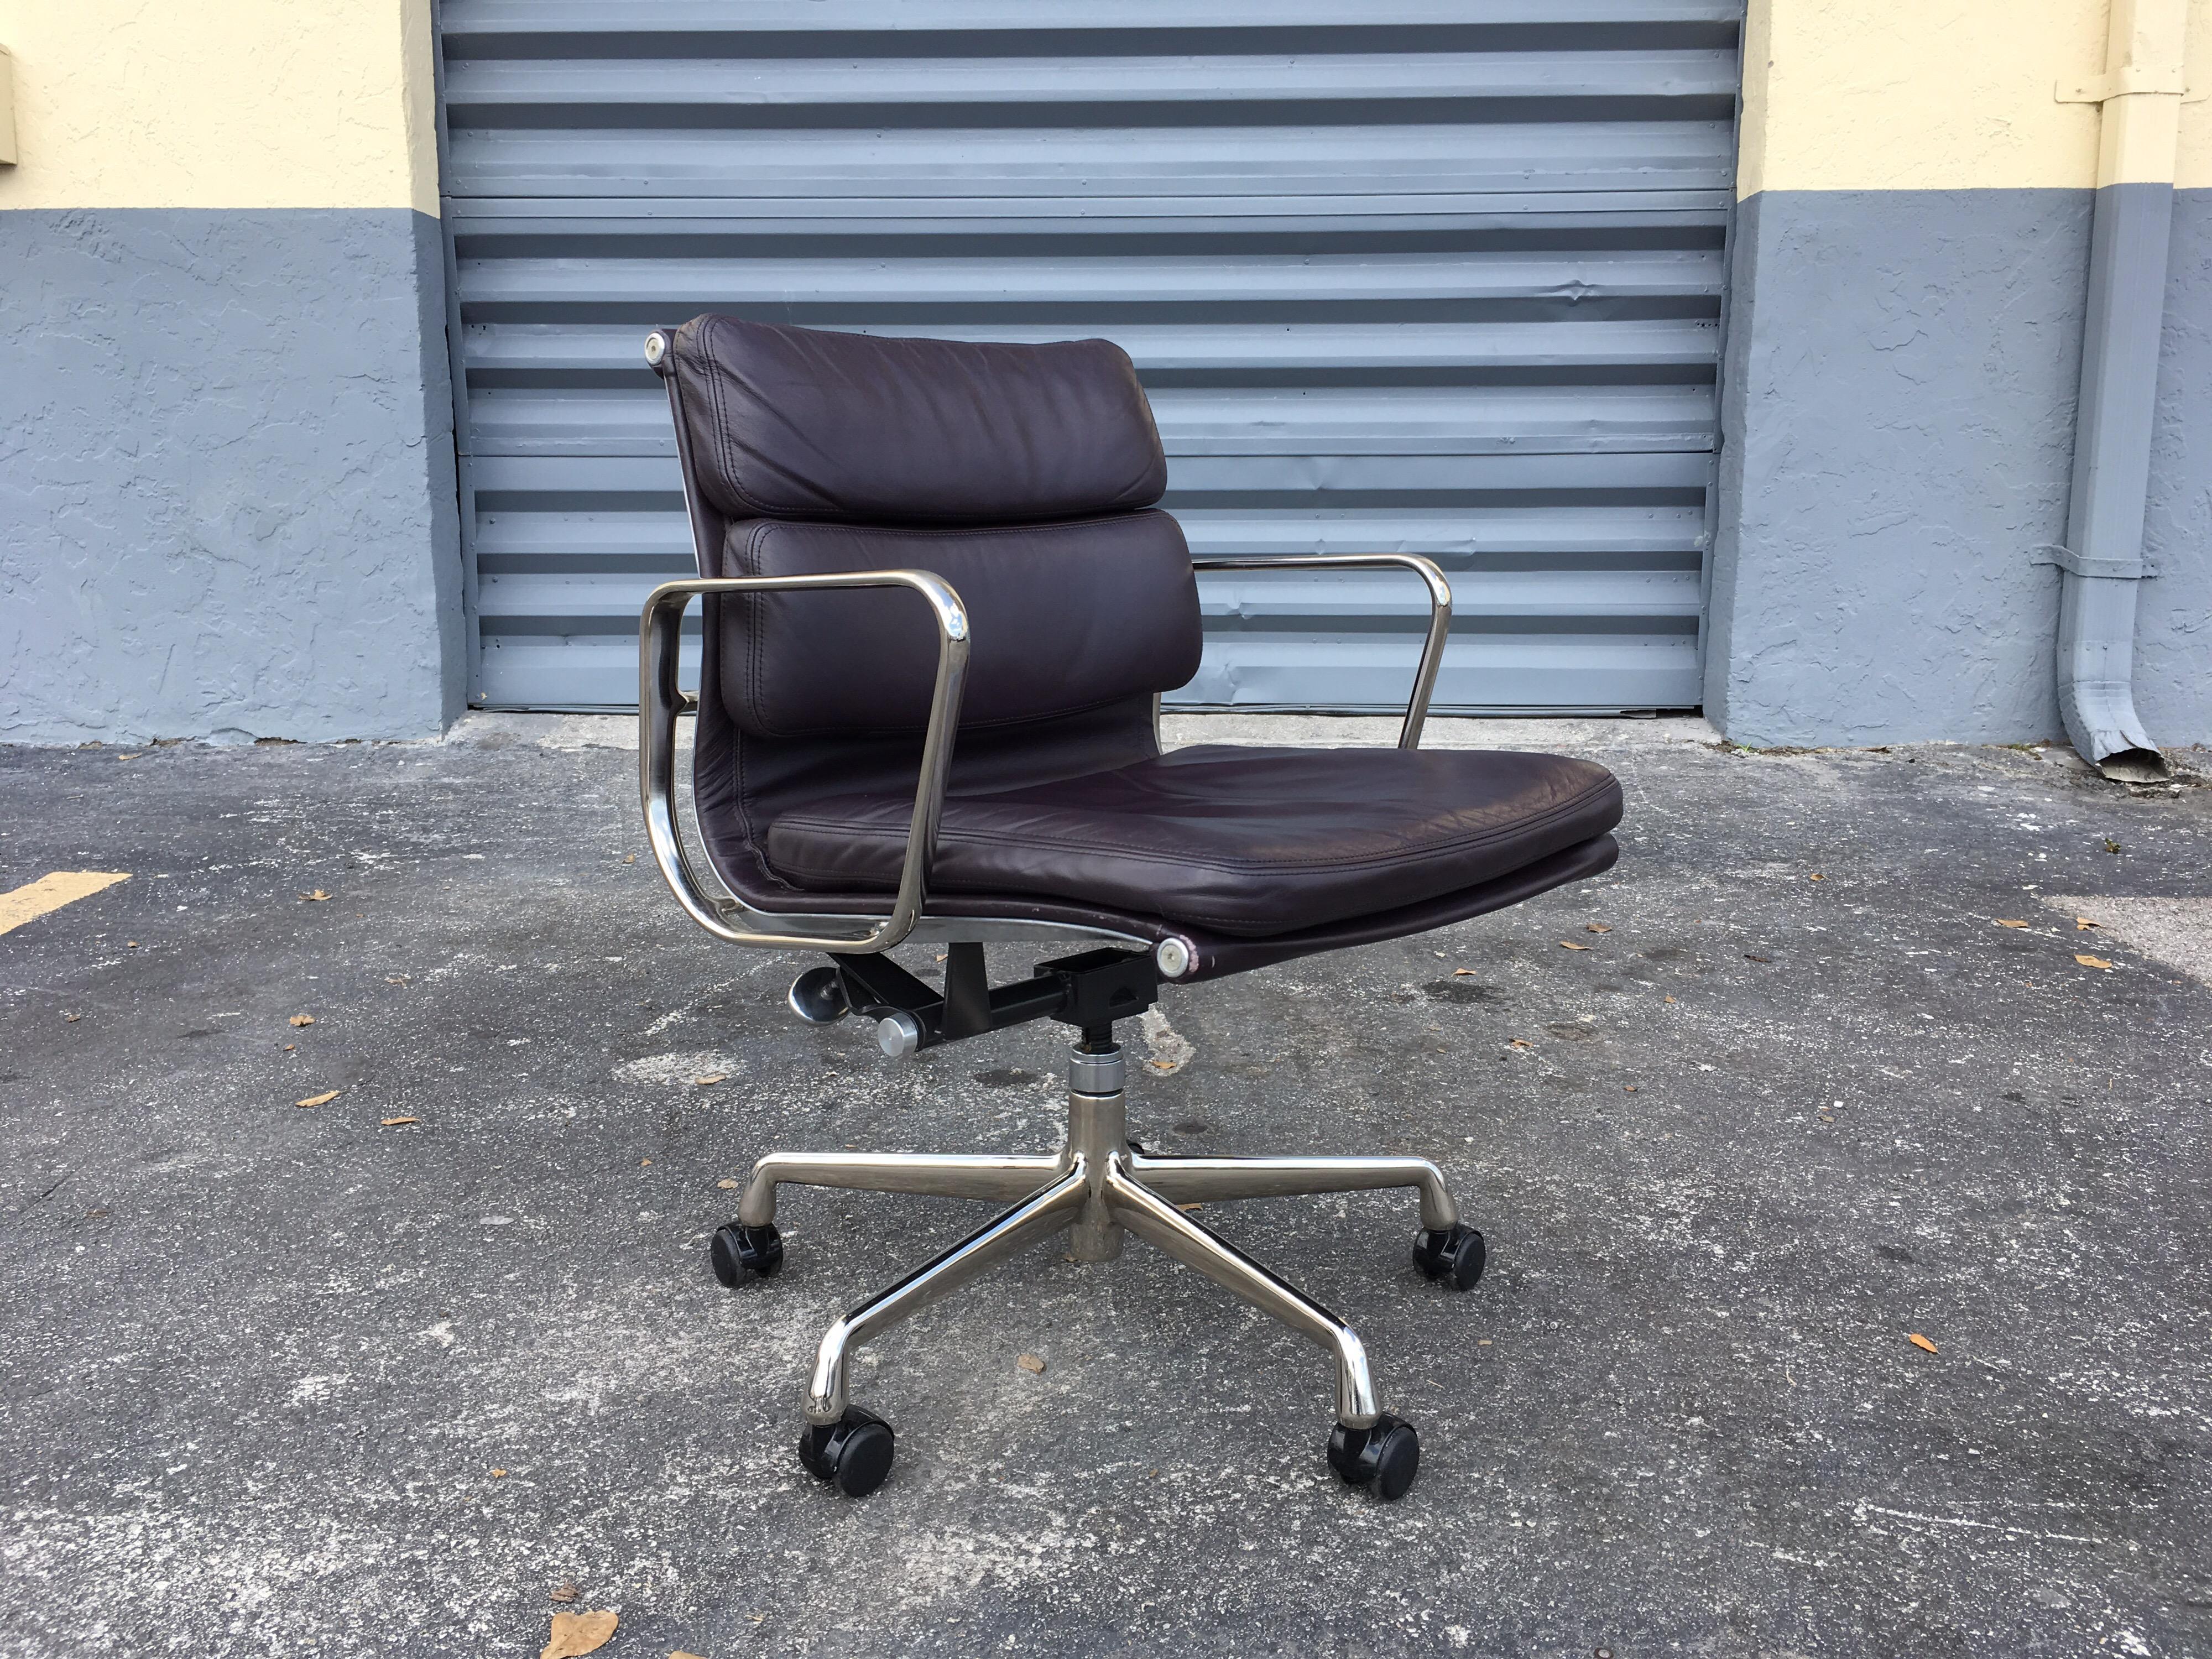 Beautiful Eames soft pad chairs for Herman Miller.
Chairs have a rare dark aubergine color leather and a chrome finish. Chairs swivel and tilt and have casters.
Twenty chairs available.
Measures: Seat height is adjustable 19.75”, 22.50”.